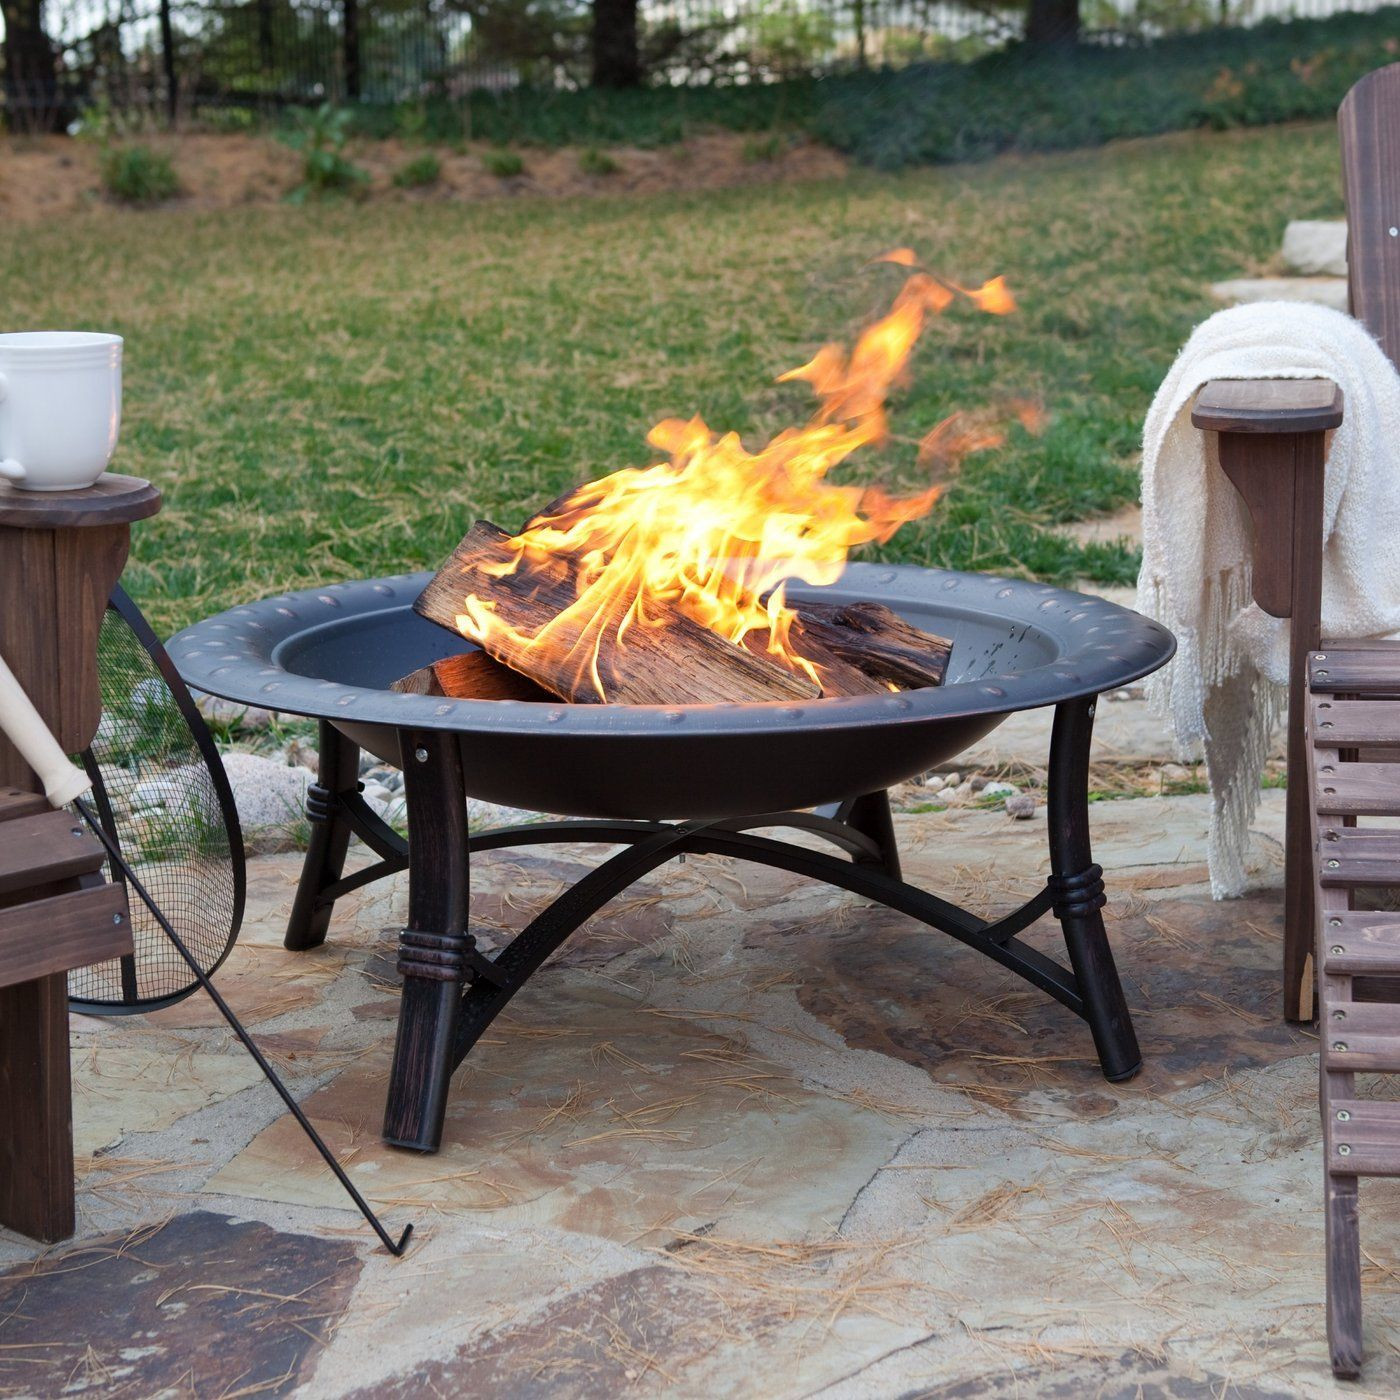 Patio Wood Fire Pit
 Outdoor Fire Pit Wood Burning Rustic Heater Patio Steel